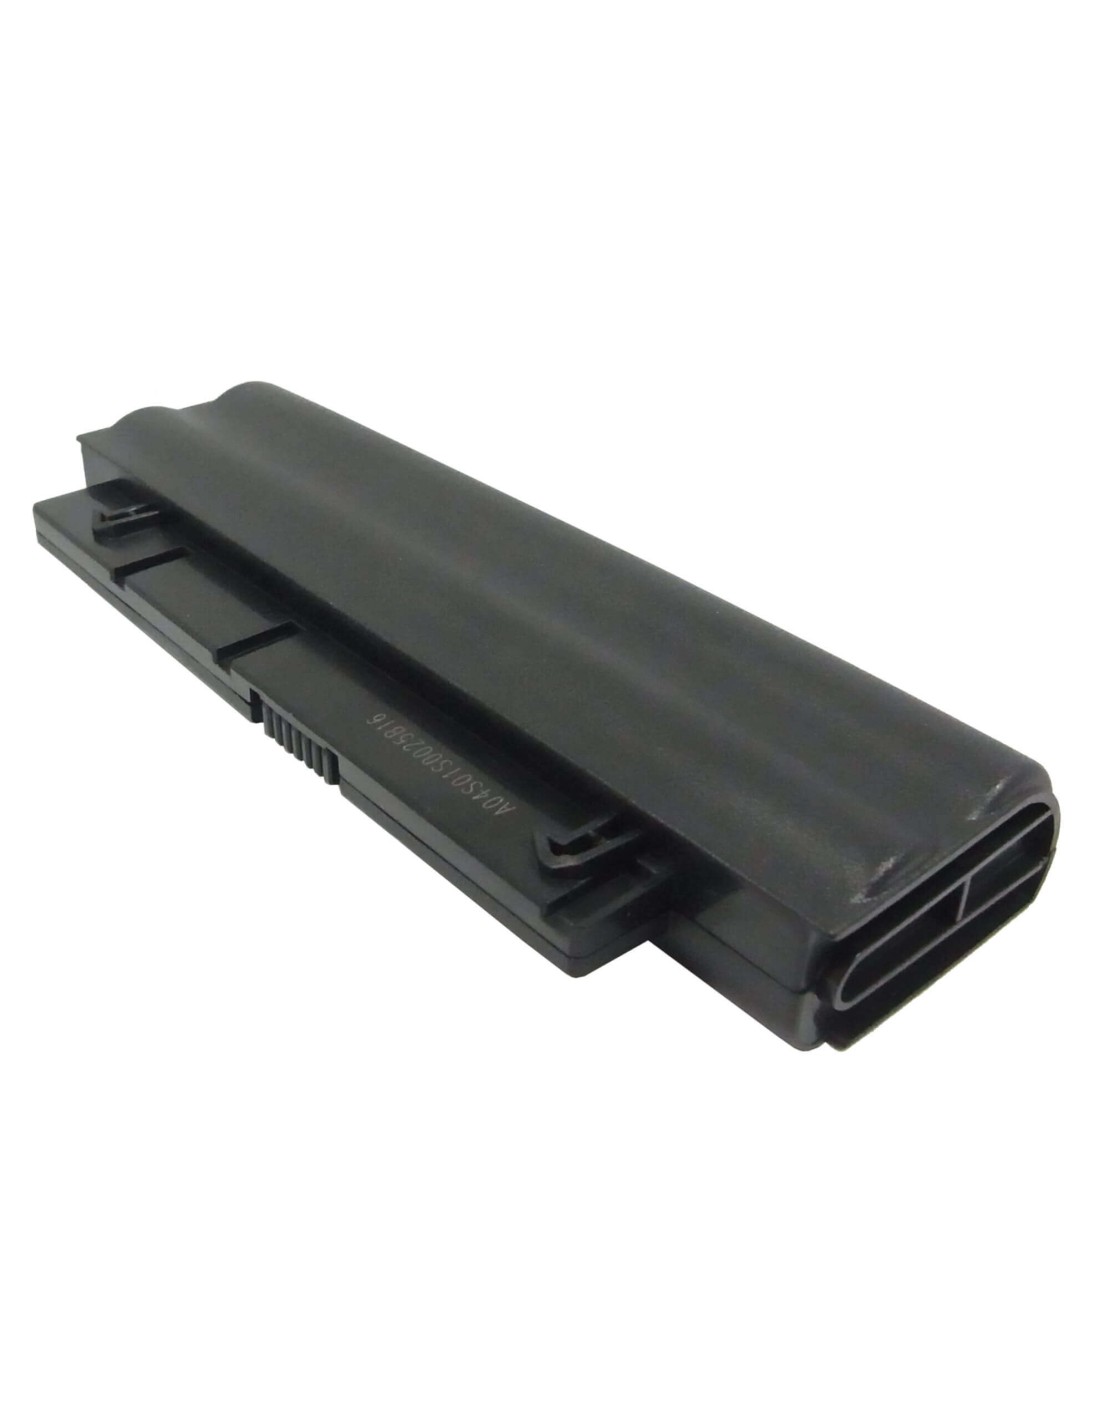 Black Battery for HP Business Notebook 2210b 14.4V, 2200mAh - 31.68Wh